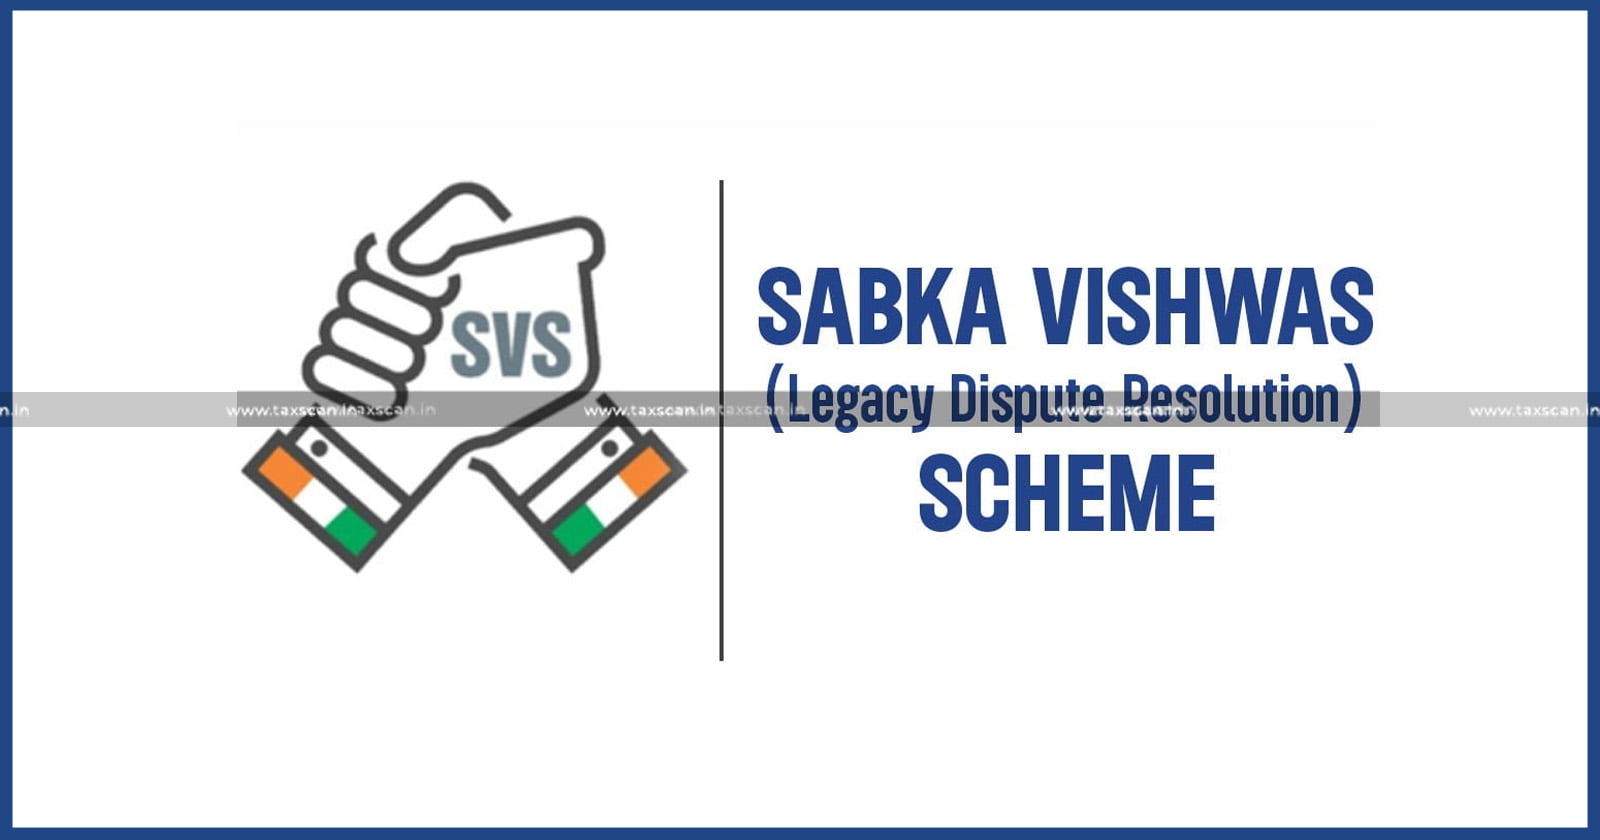 Discharge Certificates in Form-4 Issued under SVLDRS - Discharge Certificates - Form-4 - SVLDRS - CESTAT Dismisses Appeal - CESTAT - Appeal - Taxscan